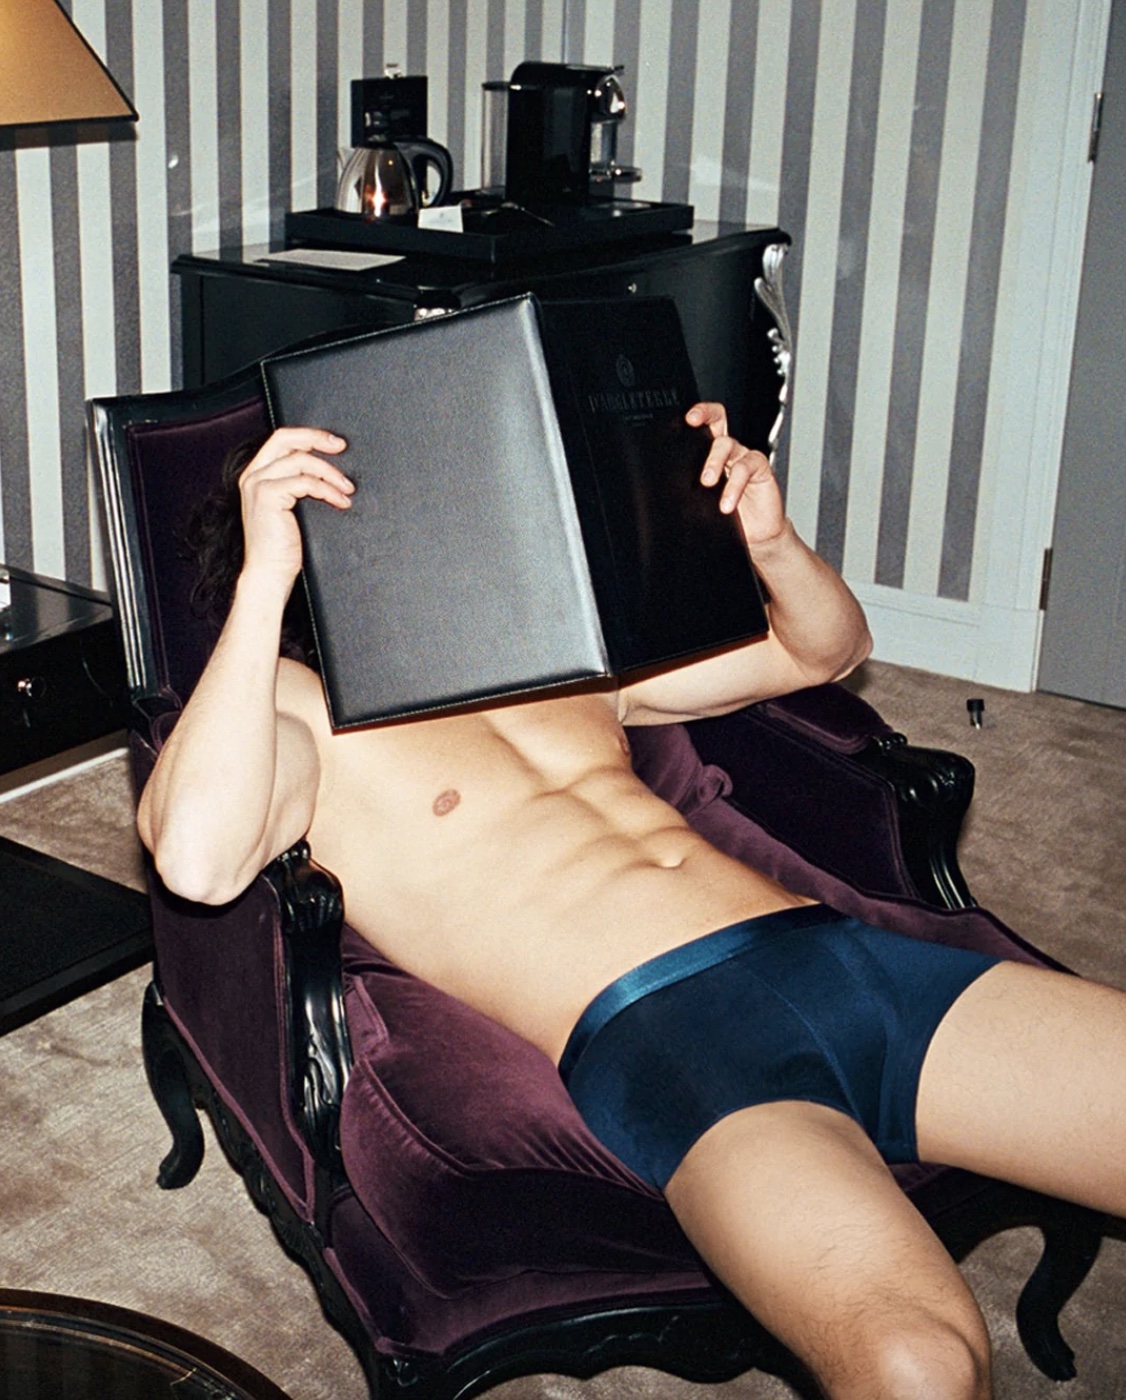 CDLP underwear model leaning back on a chair face covered with a book